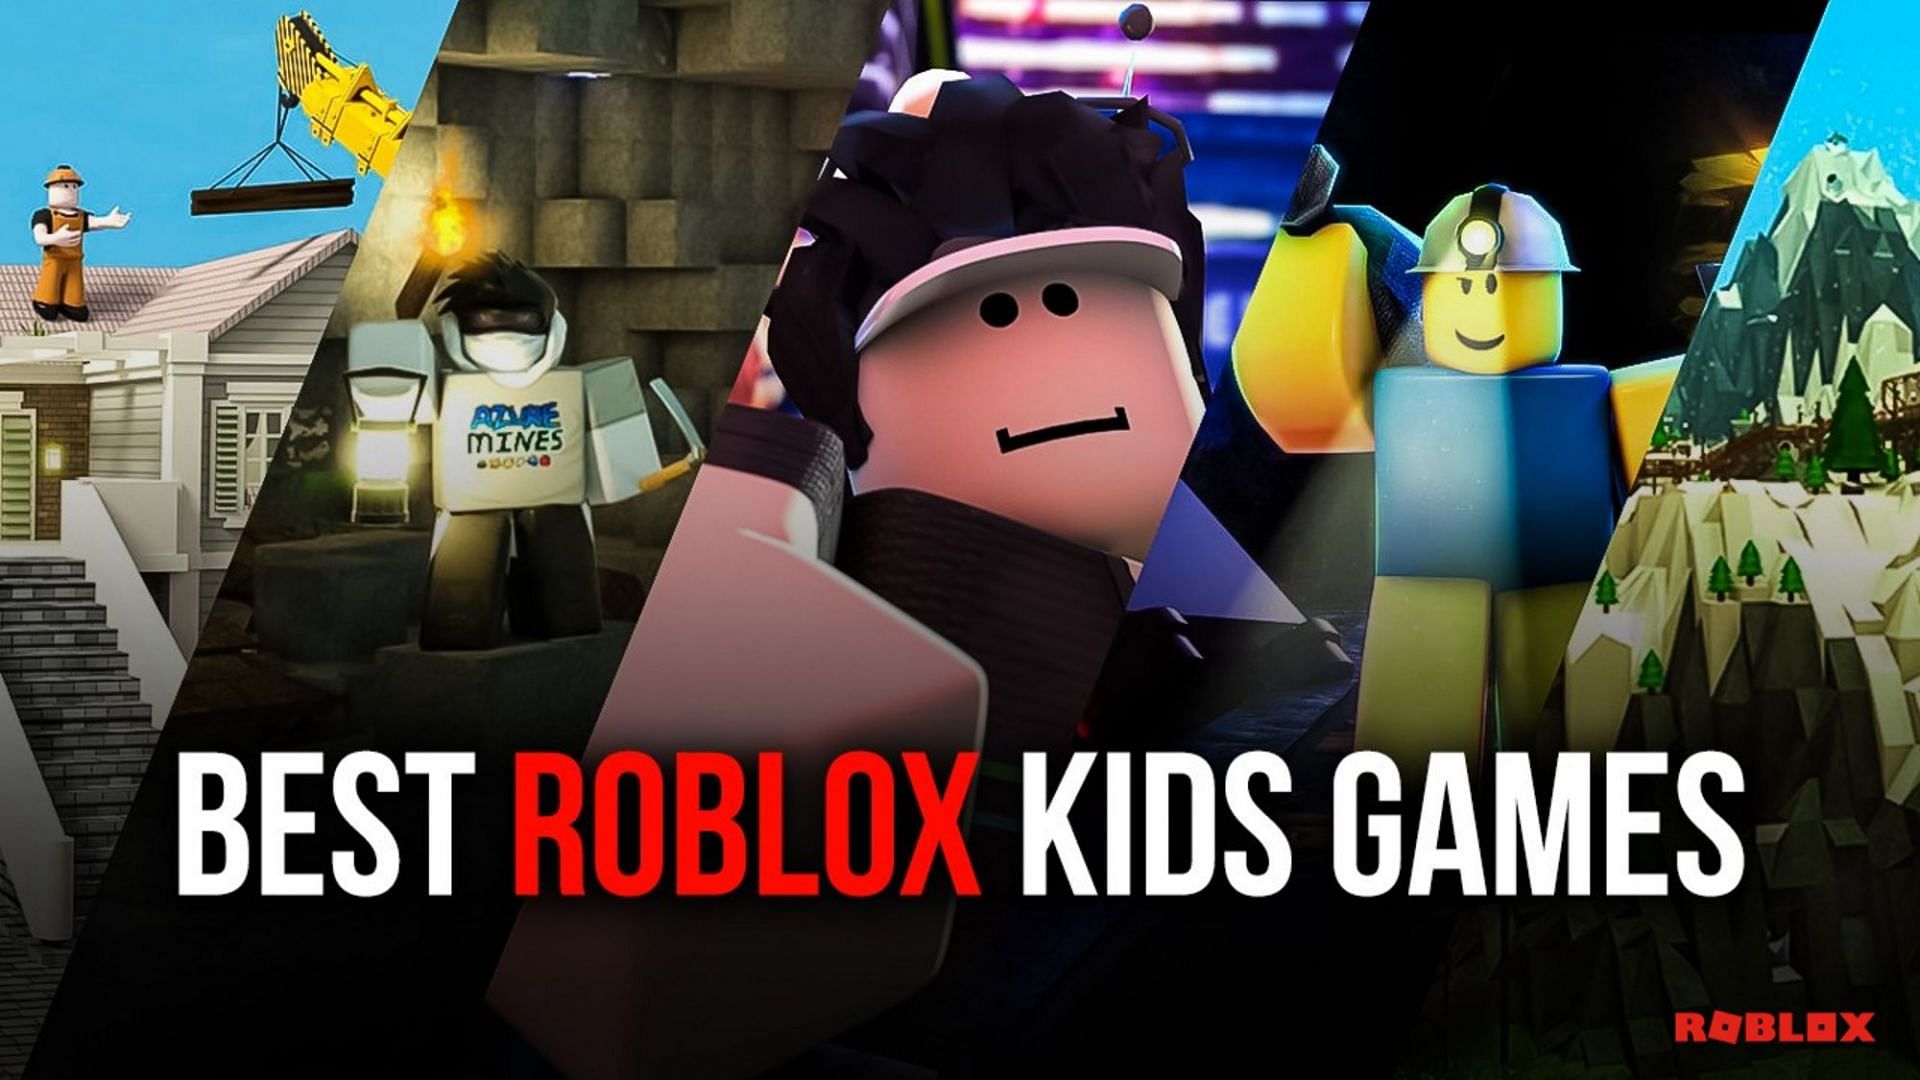 Amazing Roblox games for kids aged 9 and above (Image via Facebook Inc.)  